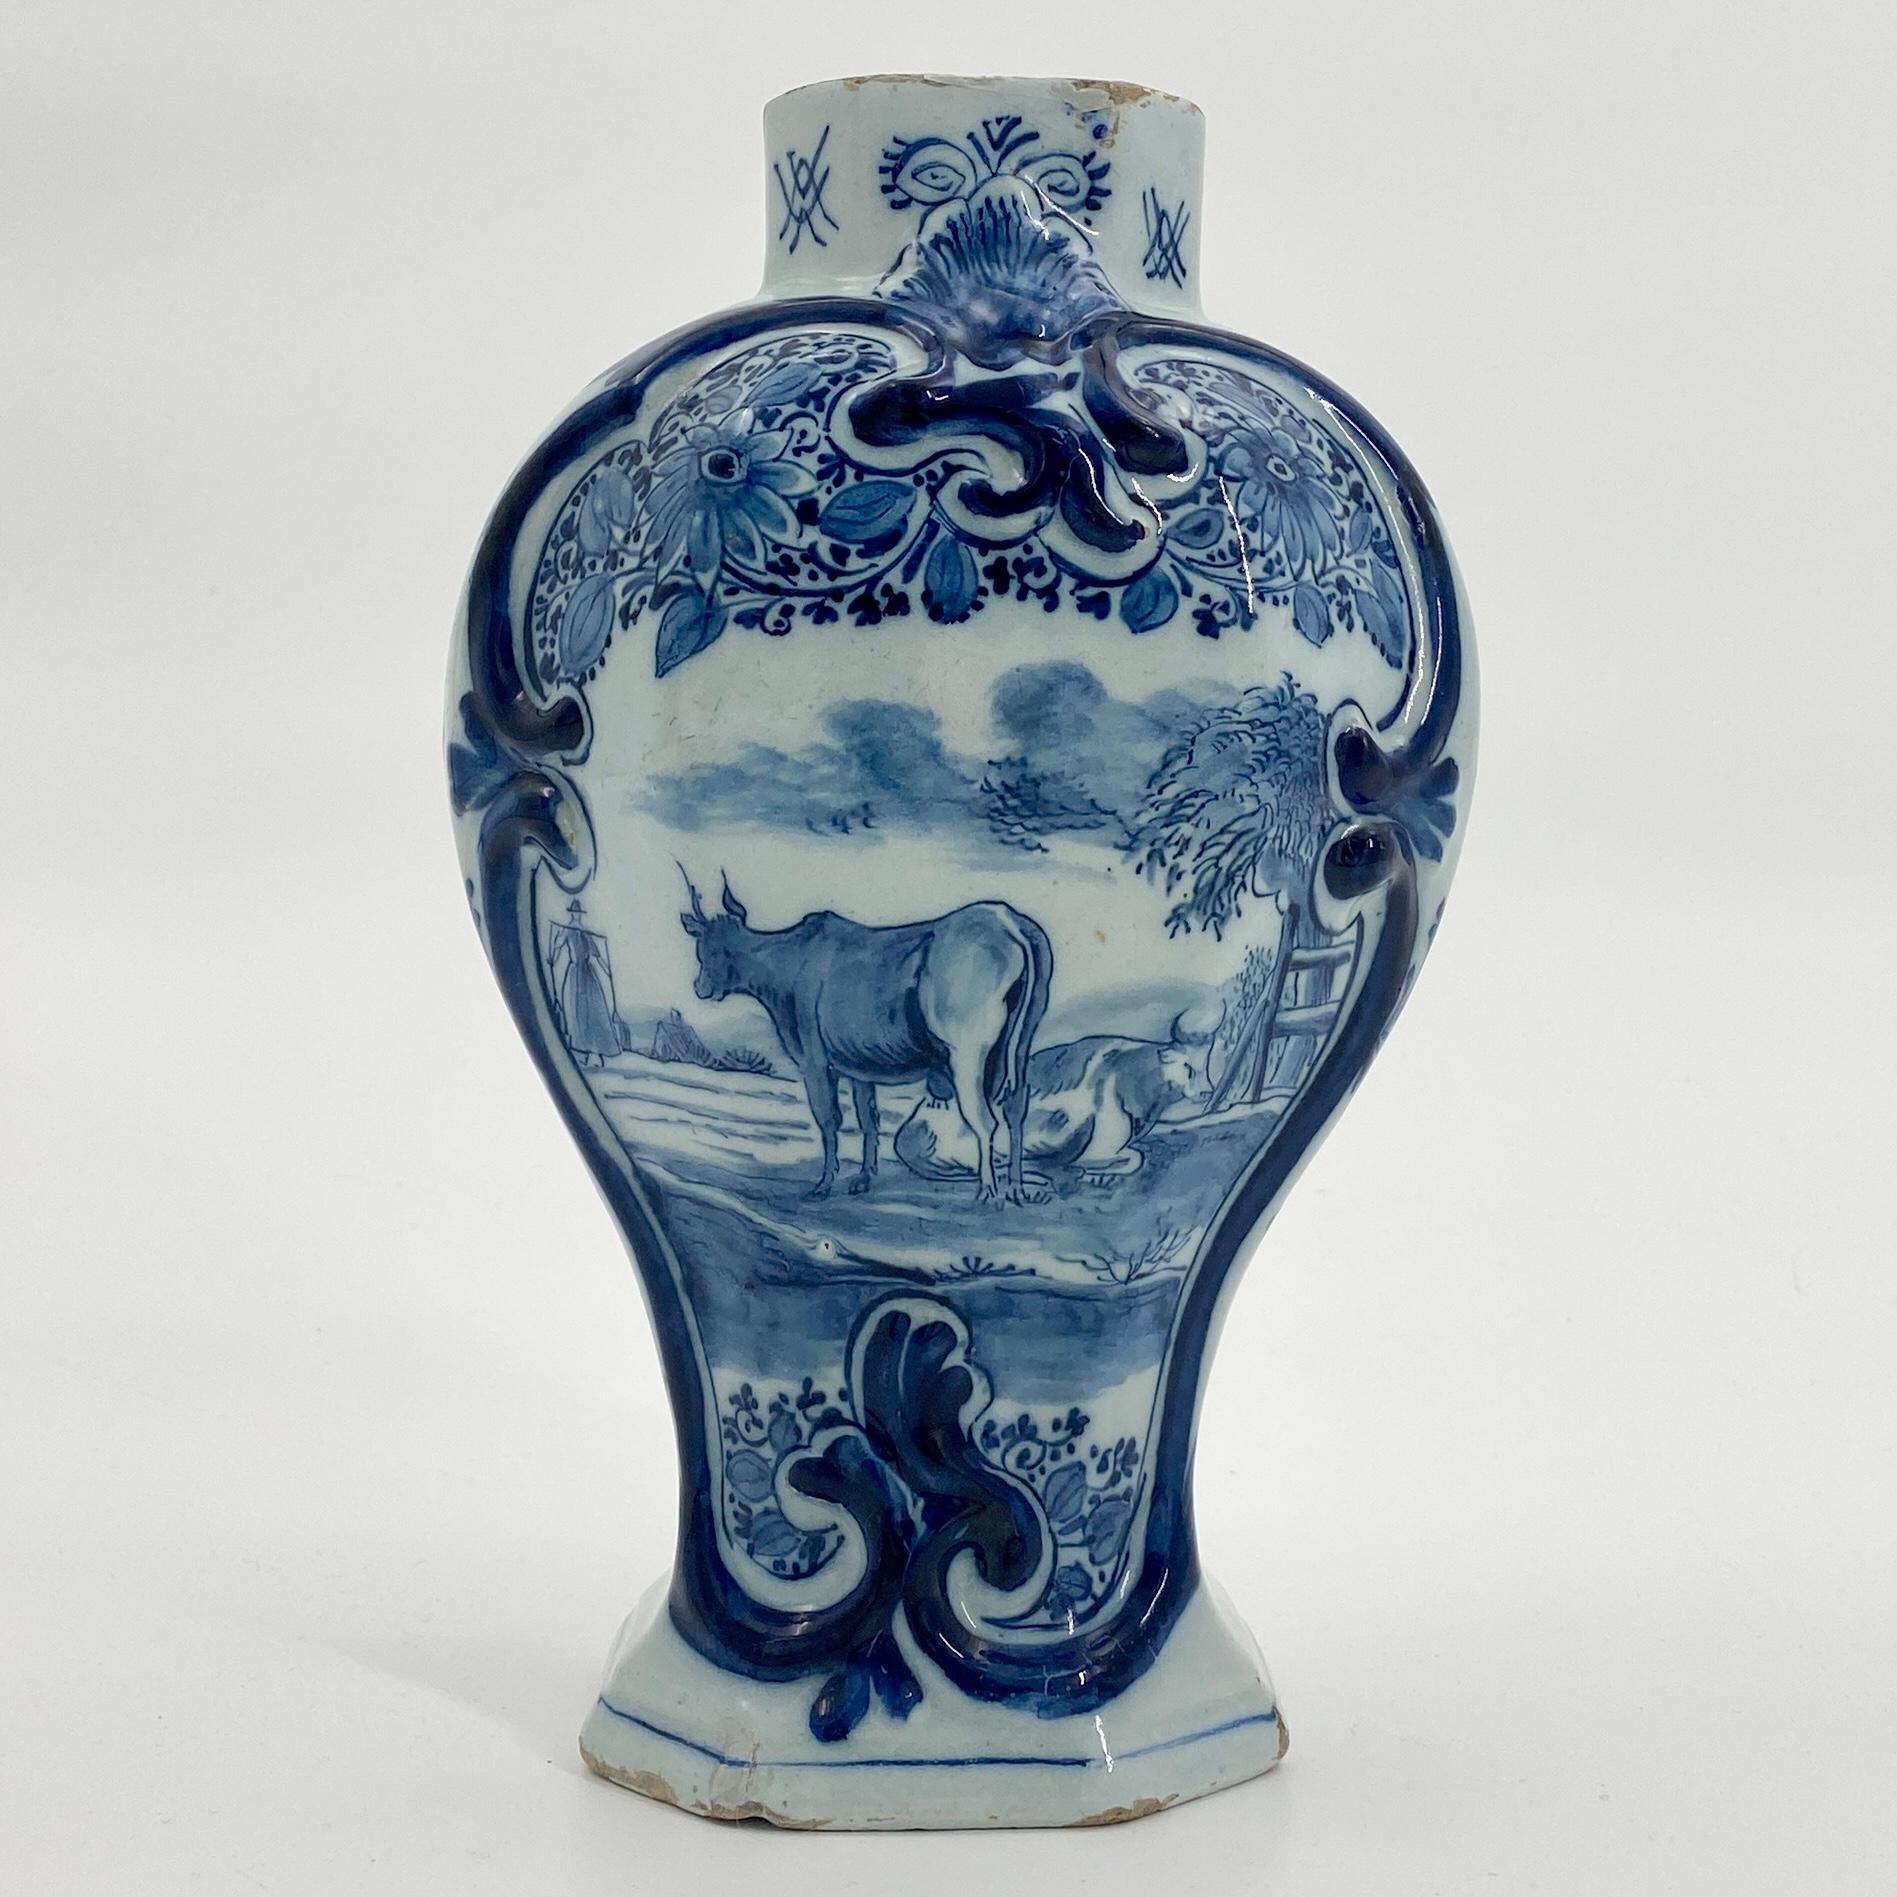 Folk Art 18th Century Blue & White Delft Vase with a Large Cow Scenery